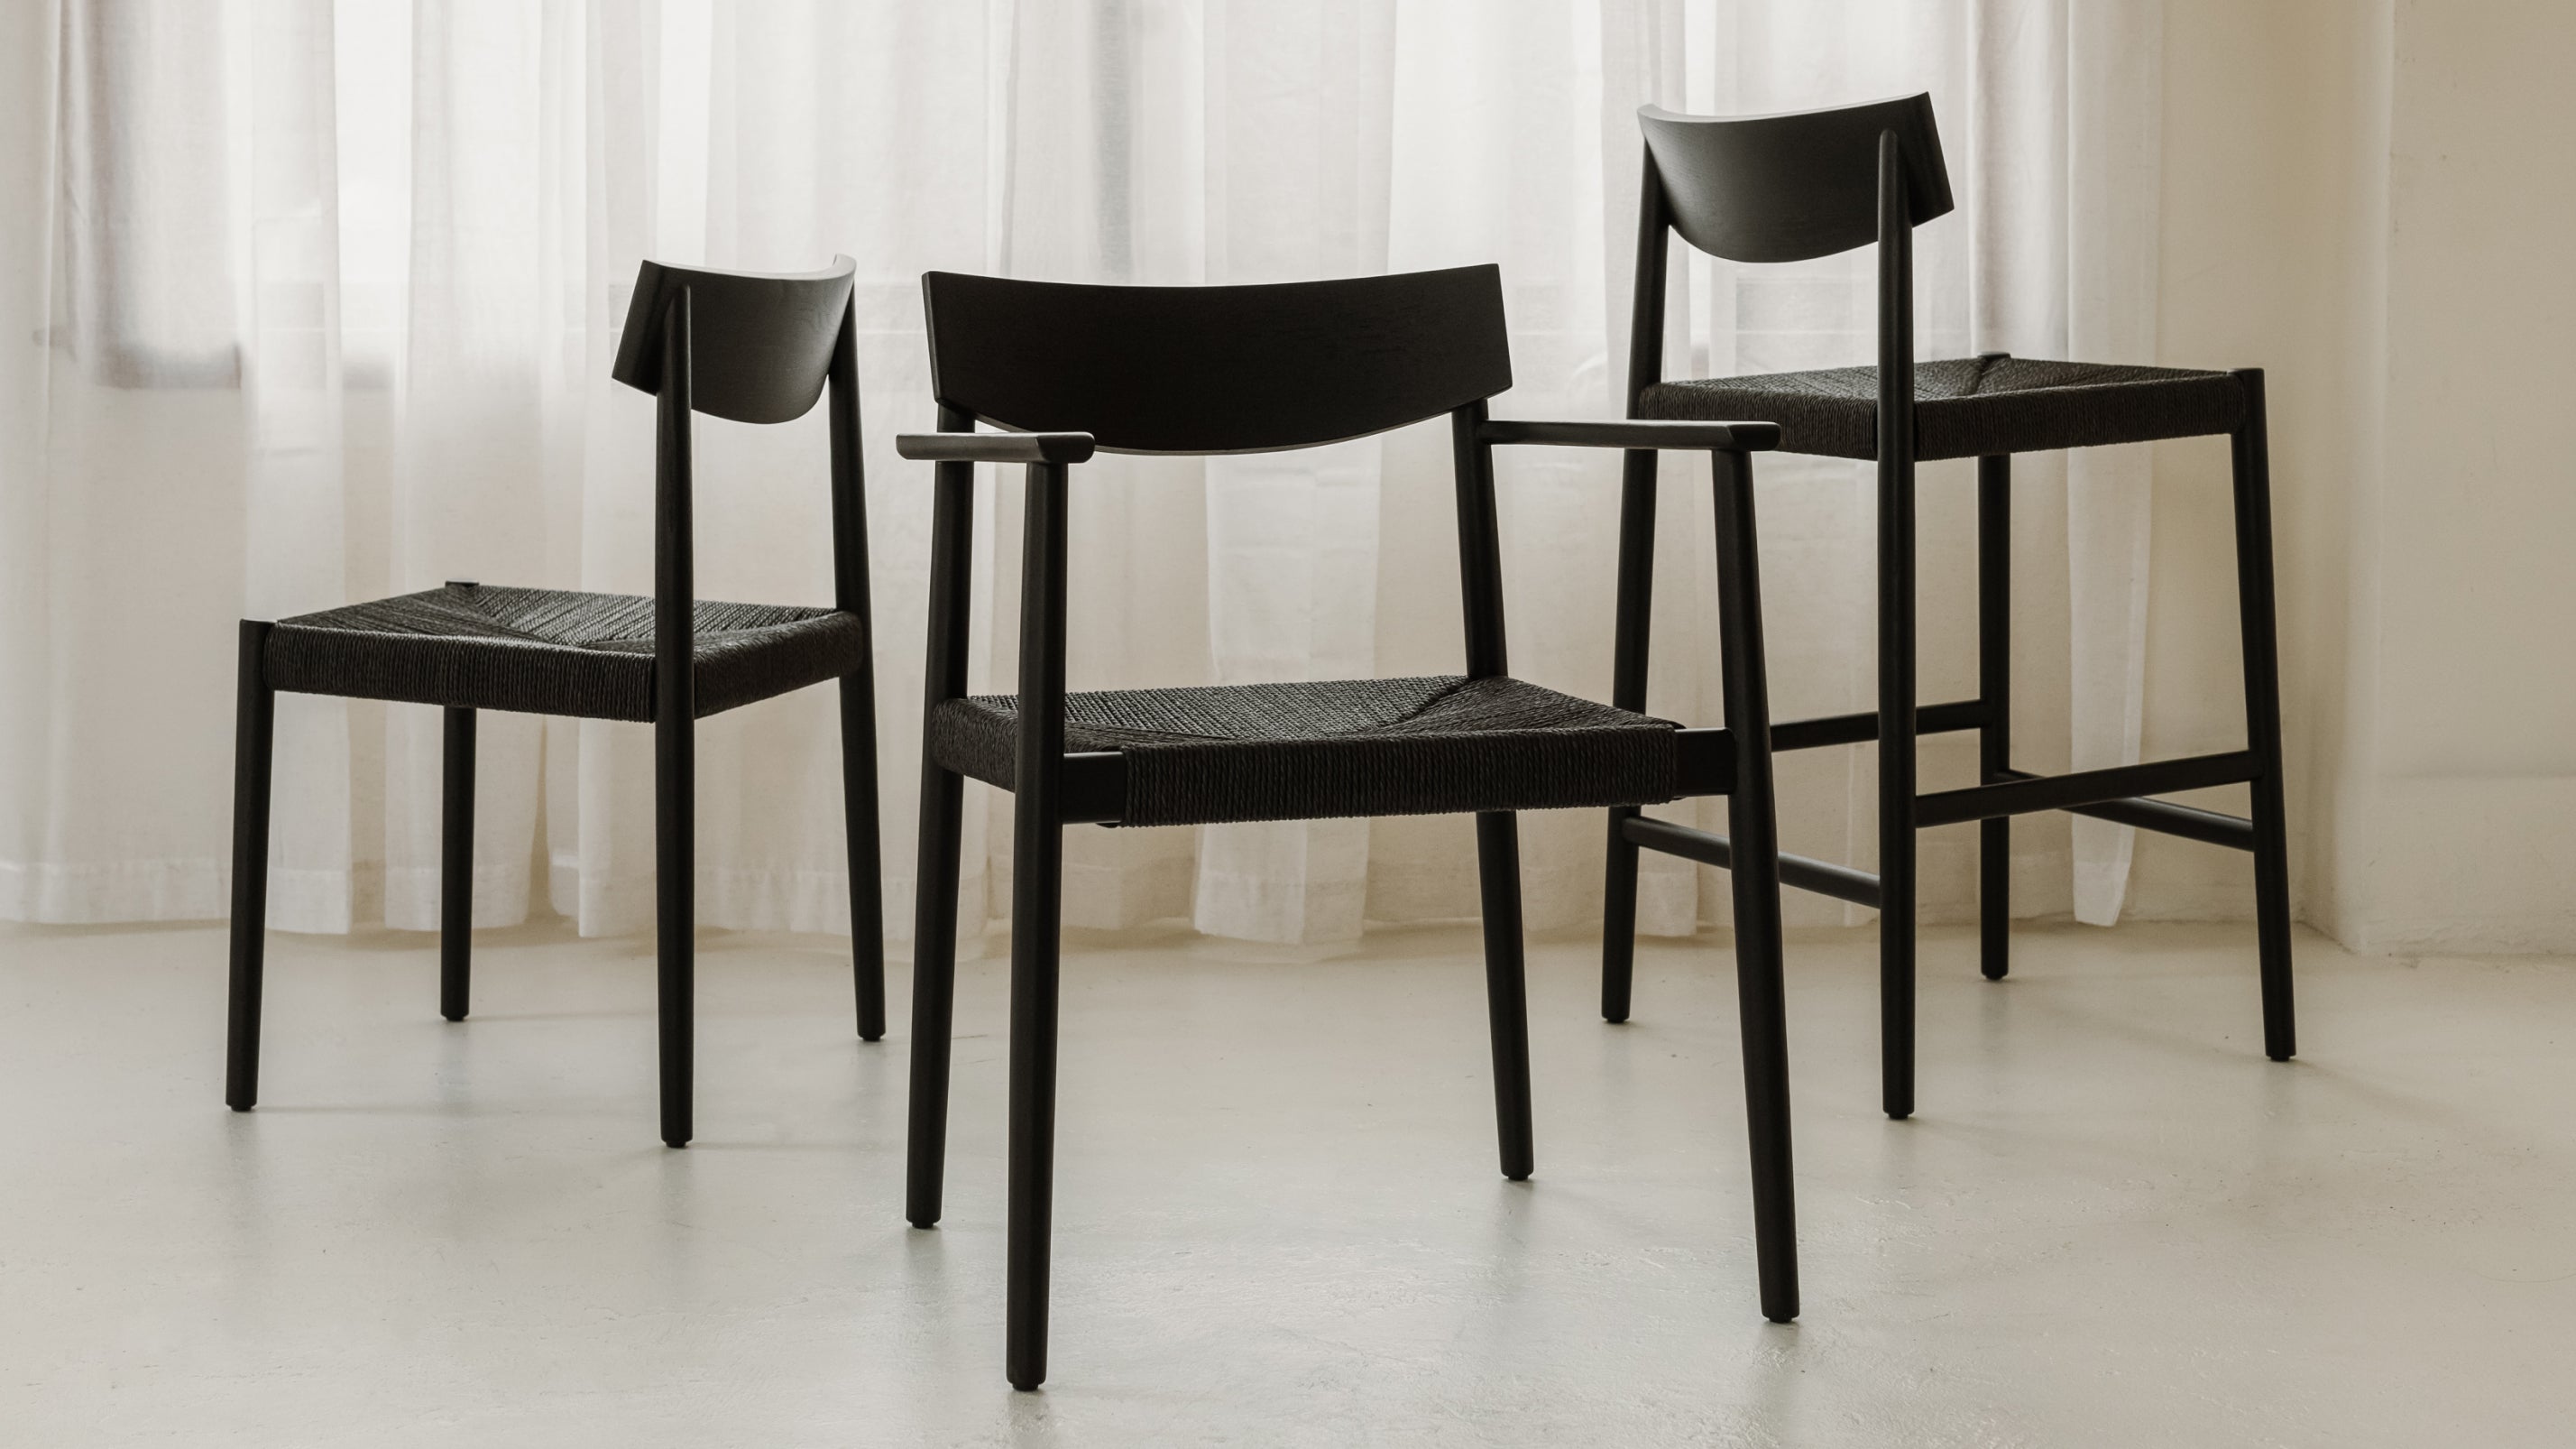 Dinner Guest Counter Stool, Black Oak/ Black Papercord Seat - Image 3